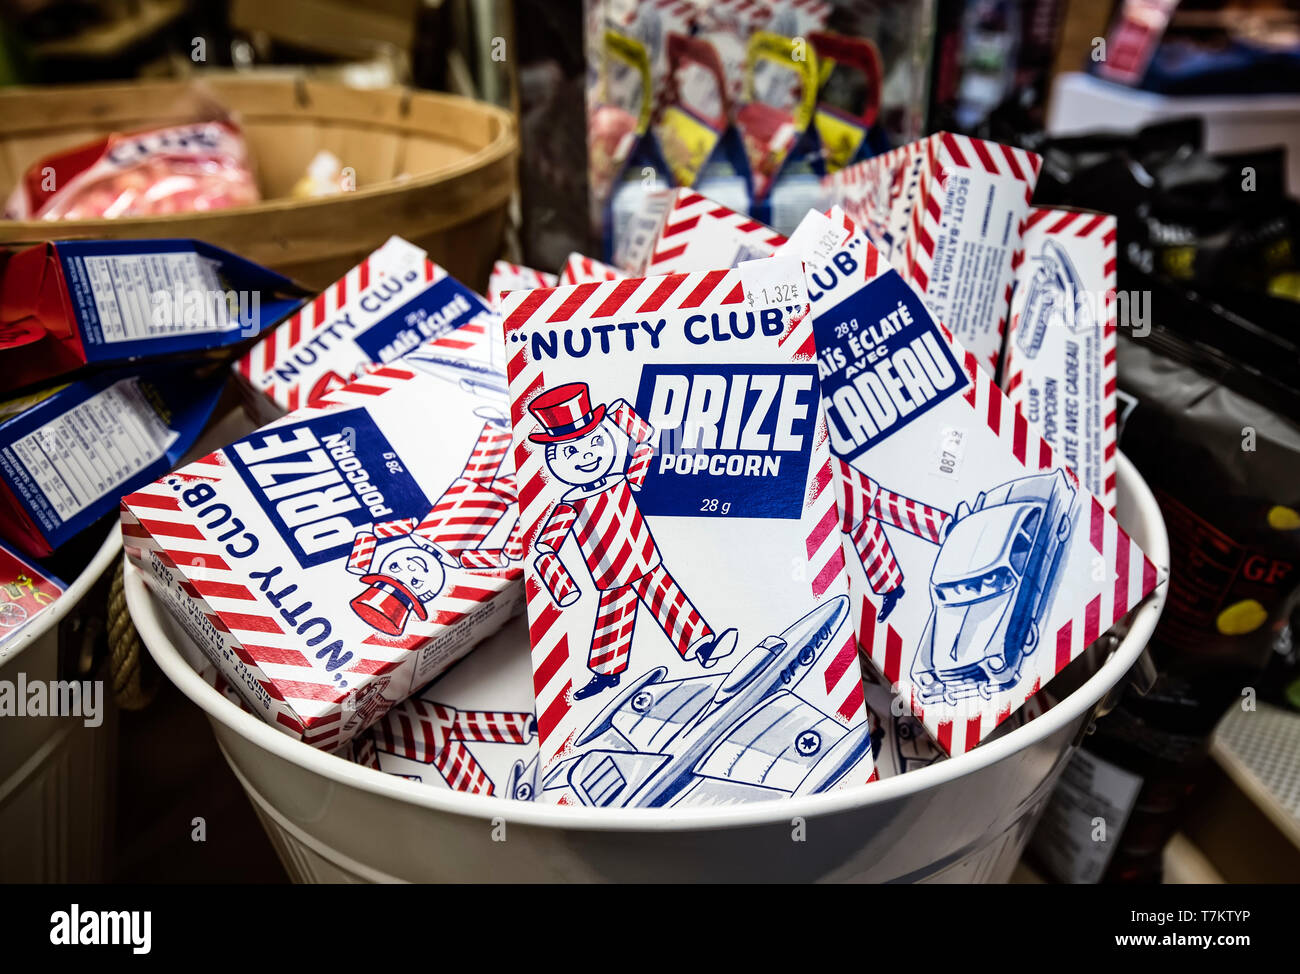 Boxes of Nutty Club Prize Popcorn. Stock Photo